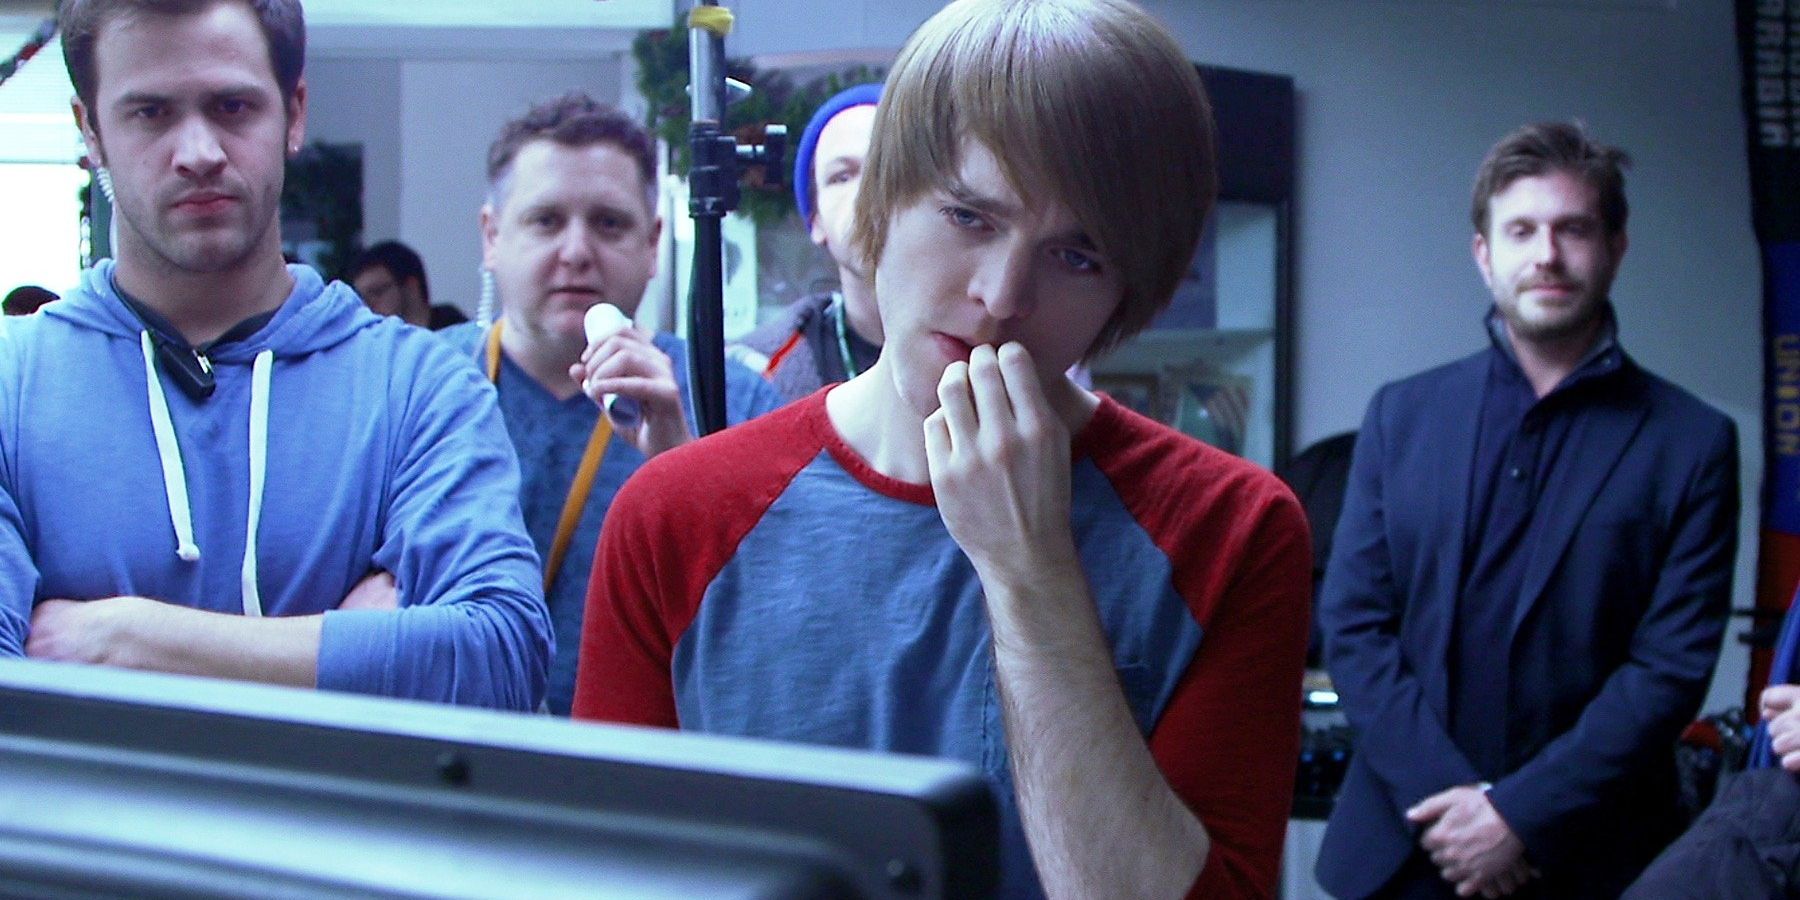 Shane Dawson picks at his lip nervously while directing his film 'Not Cool' in a scene from Starz's 'The Chair'